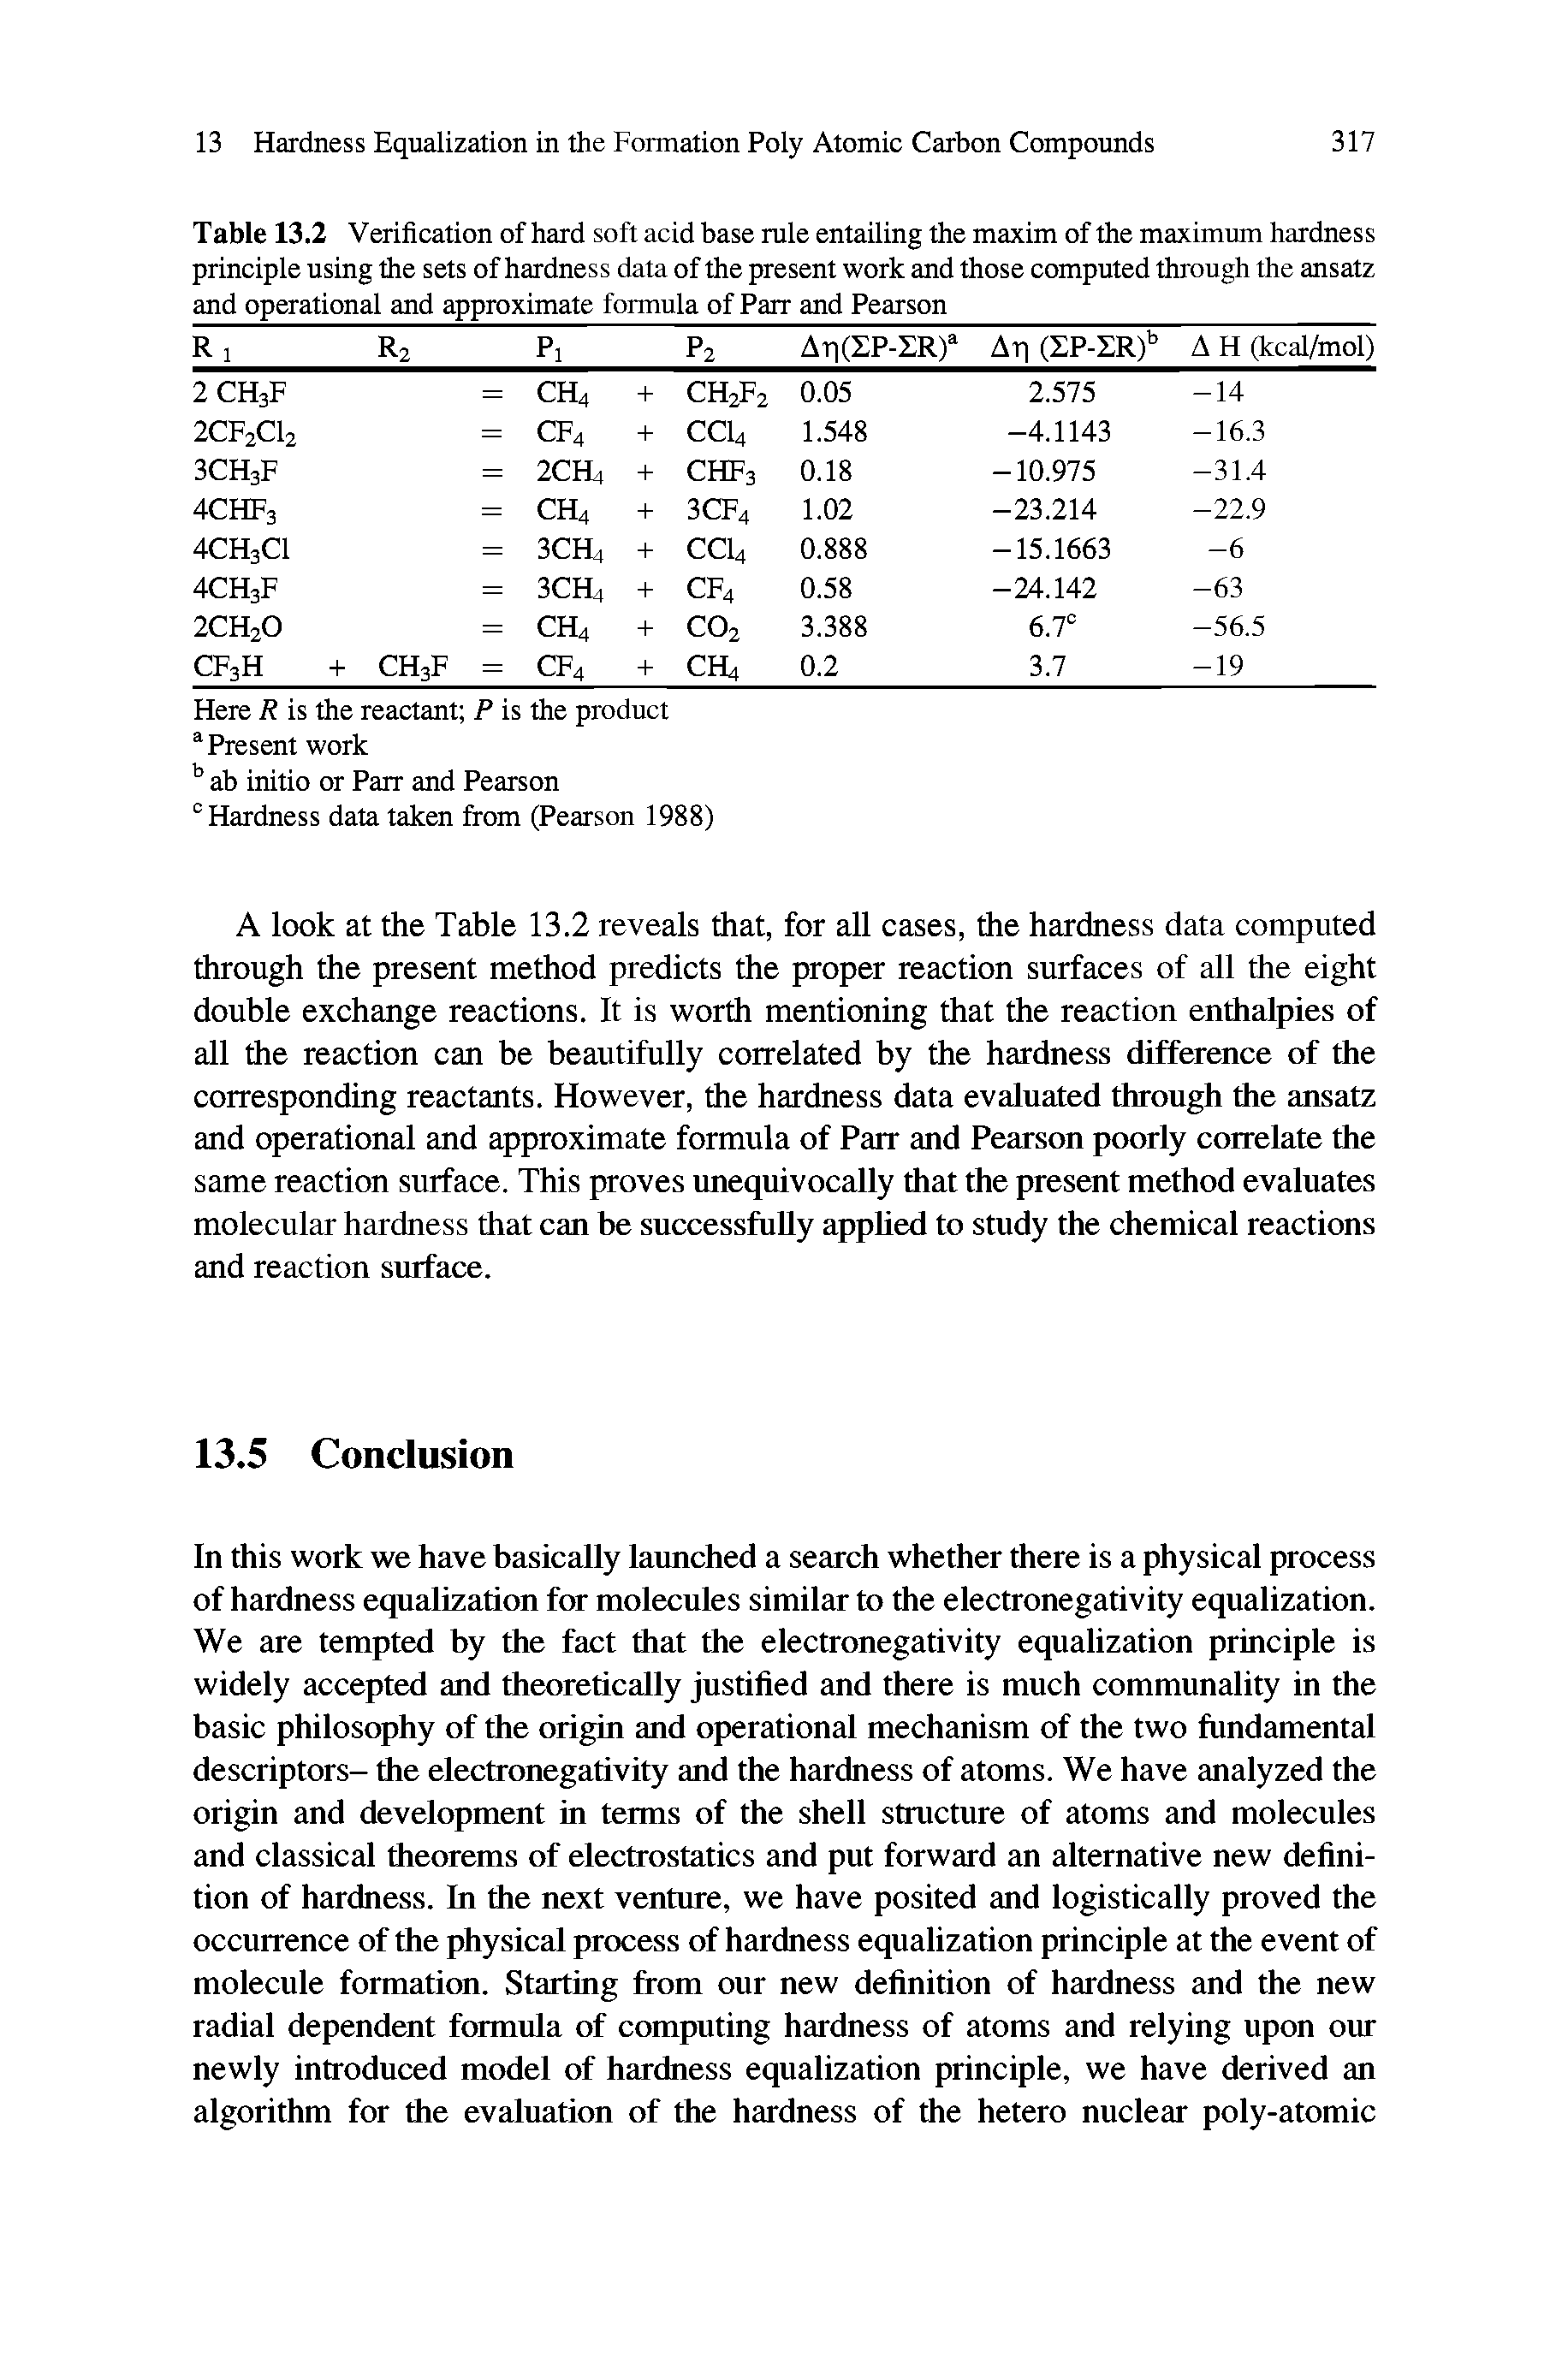 Table 13.2 Verification of hard soft acid base rule entailing the maxim of the maximum hardness principle using the sets of hardness data of the present work and those computed through the ansatz and operational and approximate formula of Parr and Pearson...